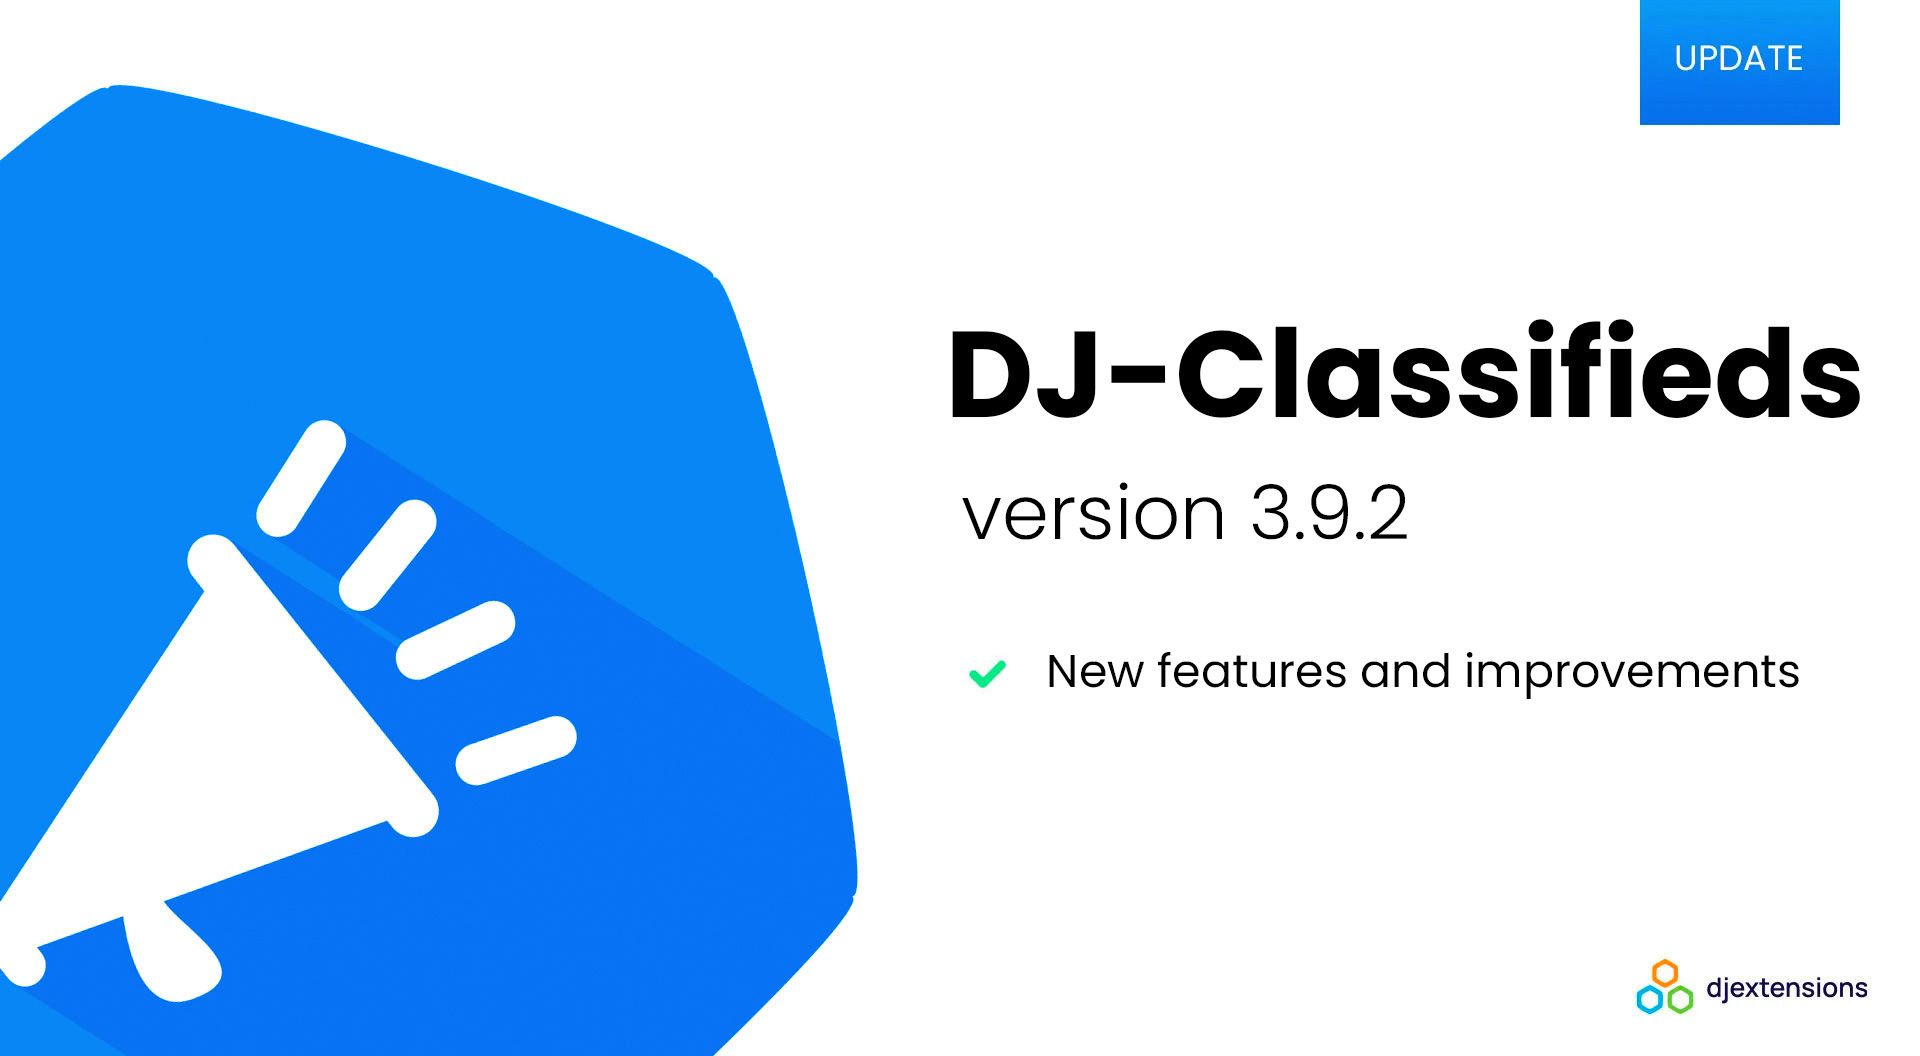 [UPDATE] DJ-Classifieds version 3.9.2 brings many new features and changes